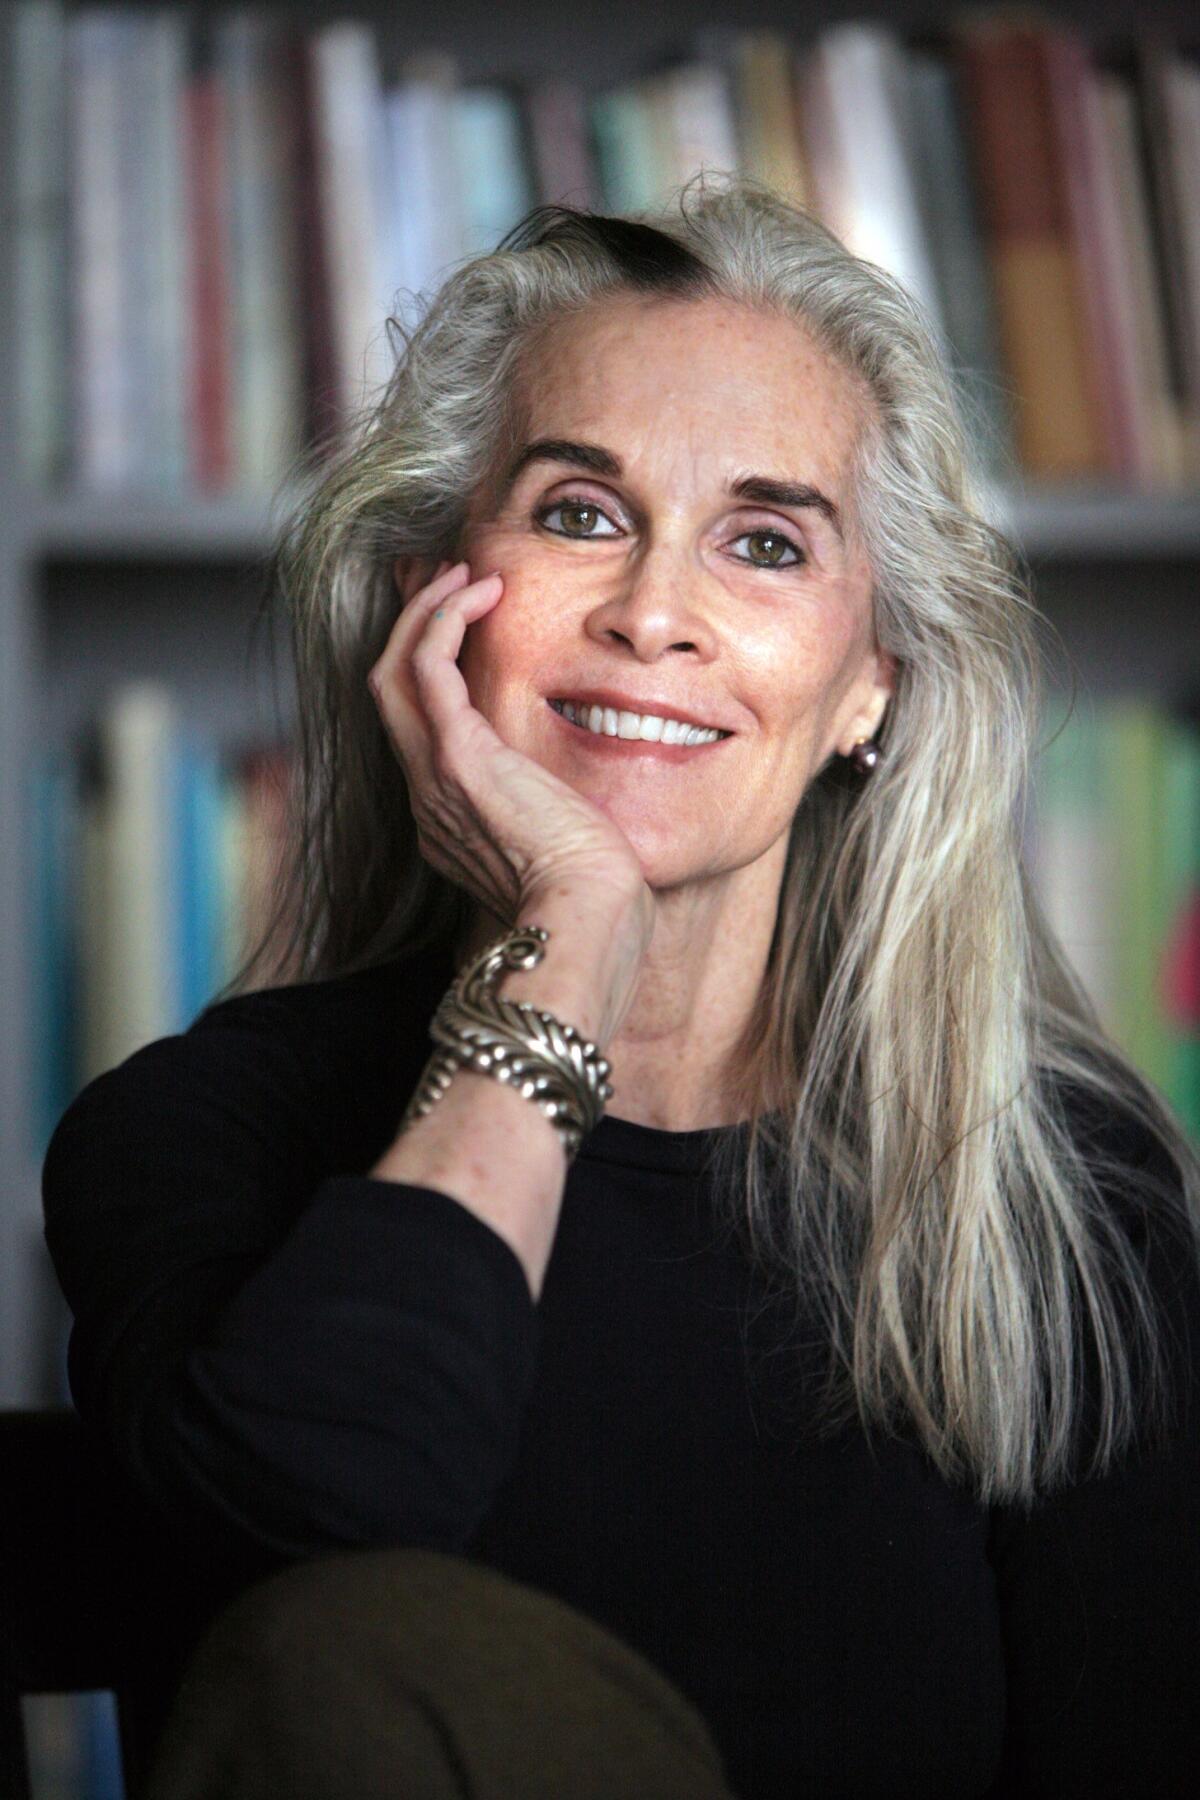 A woman with long gray hair and a long-sleeved black shirt in front of a bookshelf.